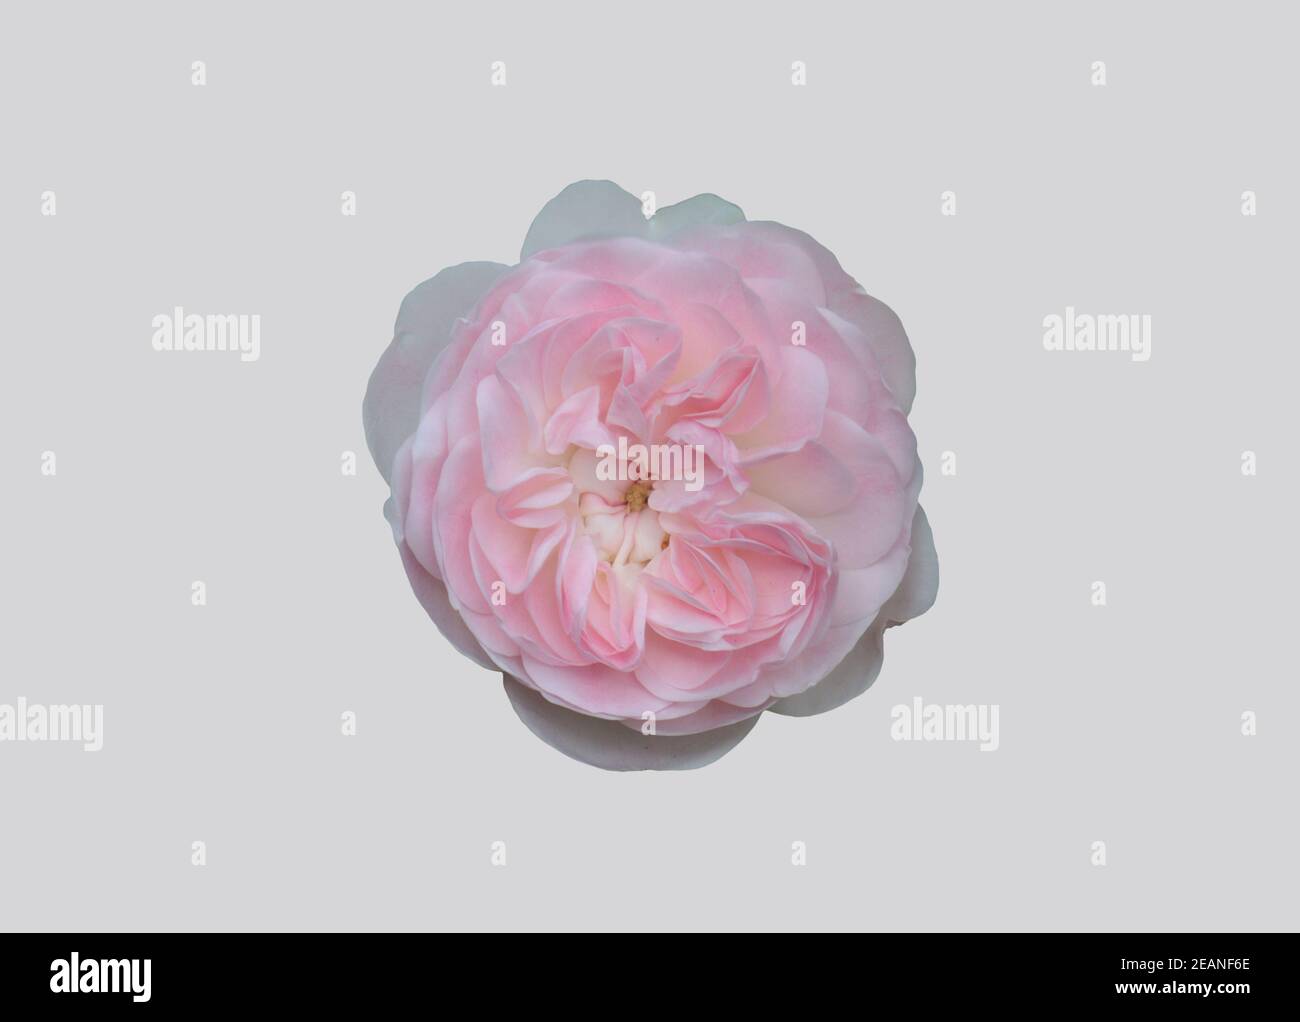 Blooming rose plant. Stock Photo